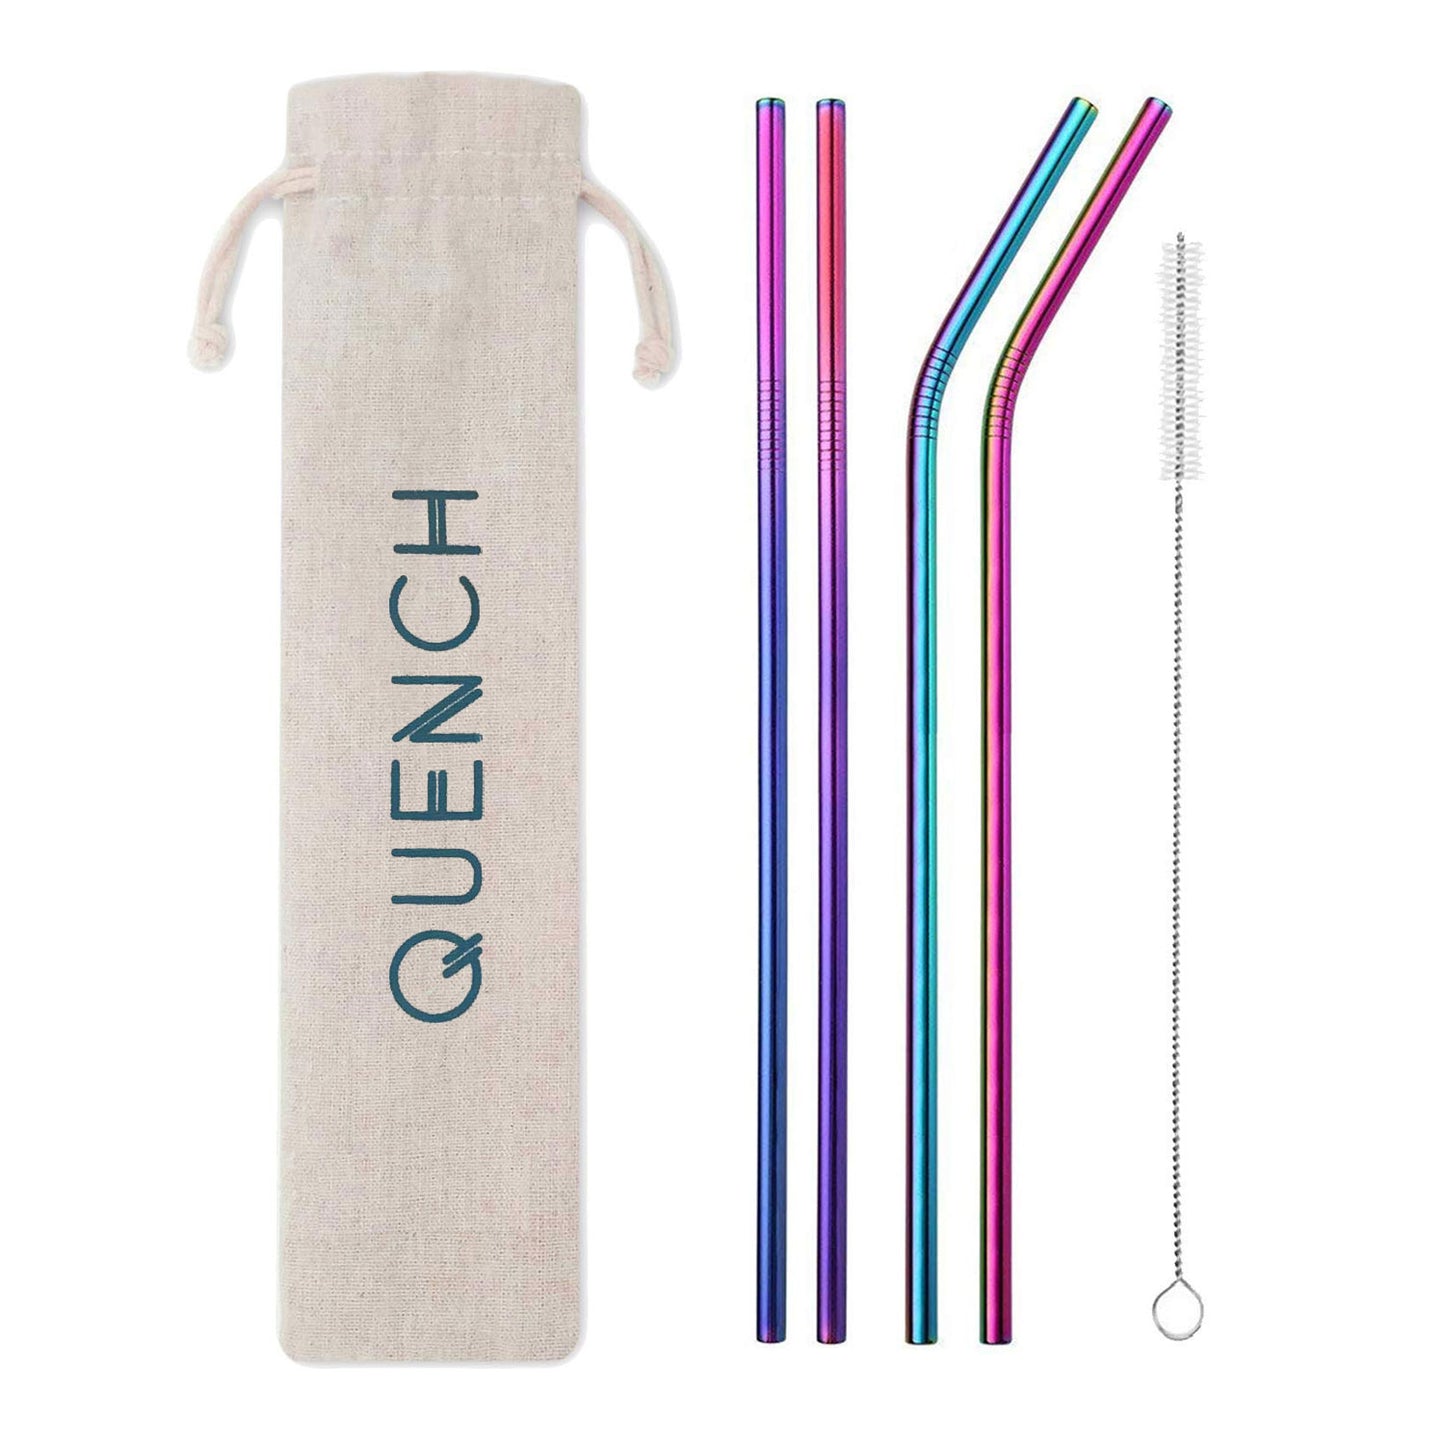 Rainbow Set of 5 Stainless Steel Eco-Friendly Reusable Drinking Straws